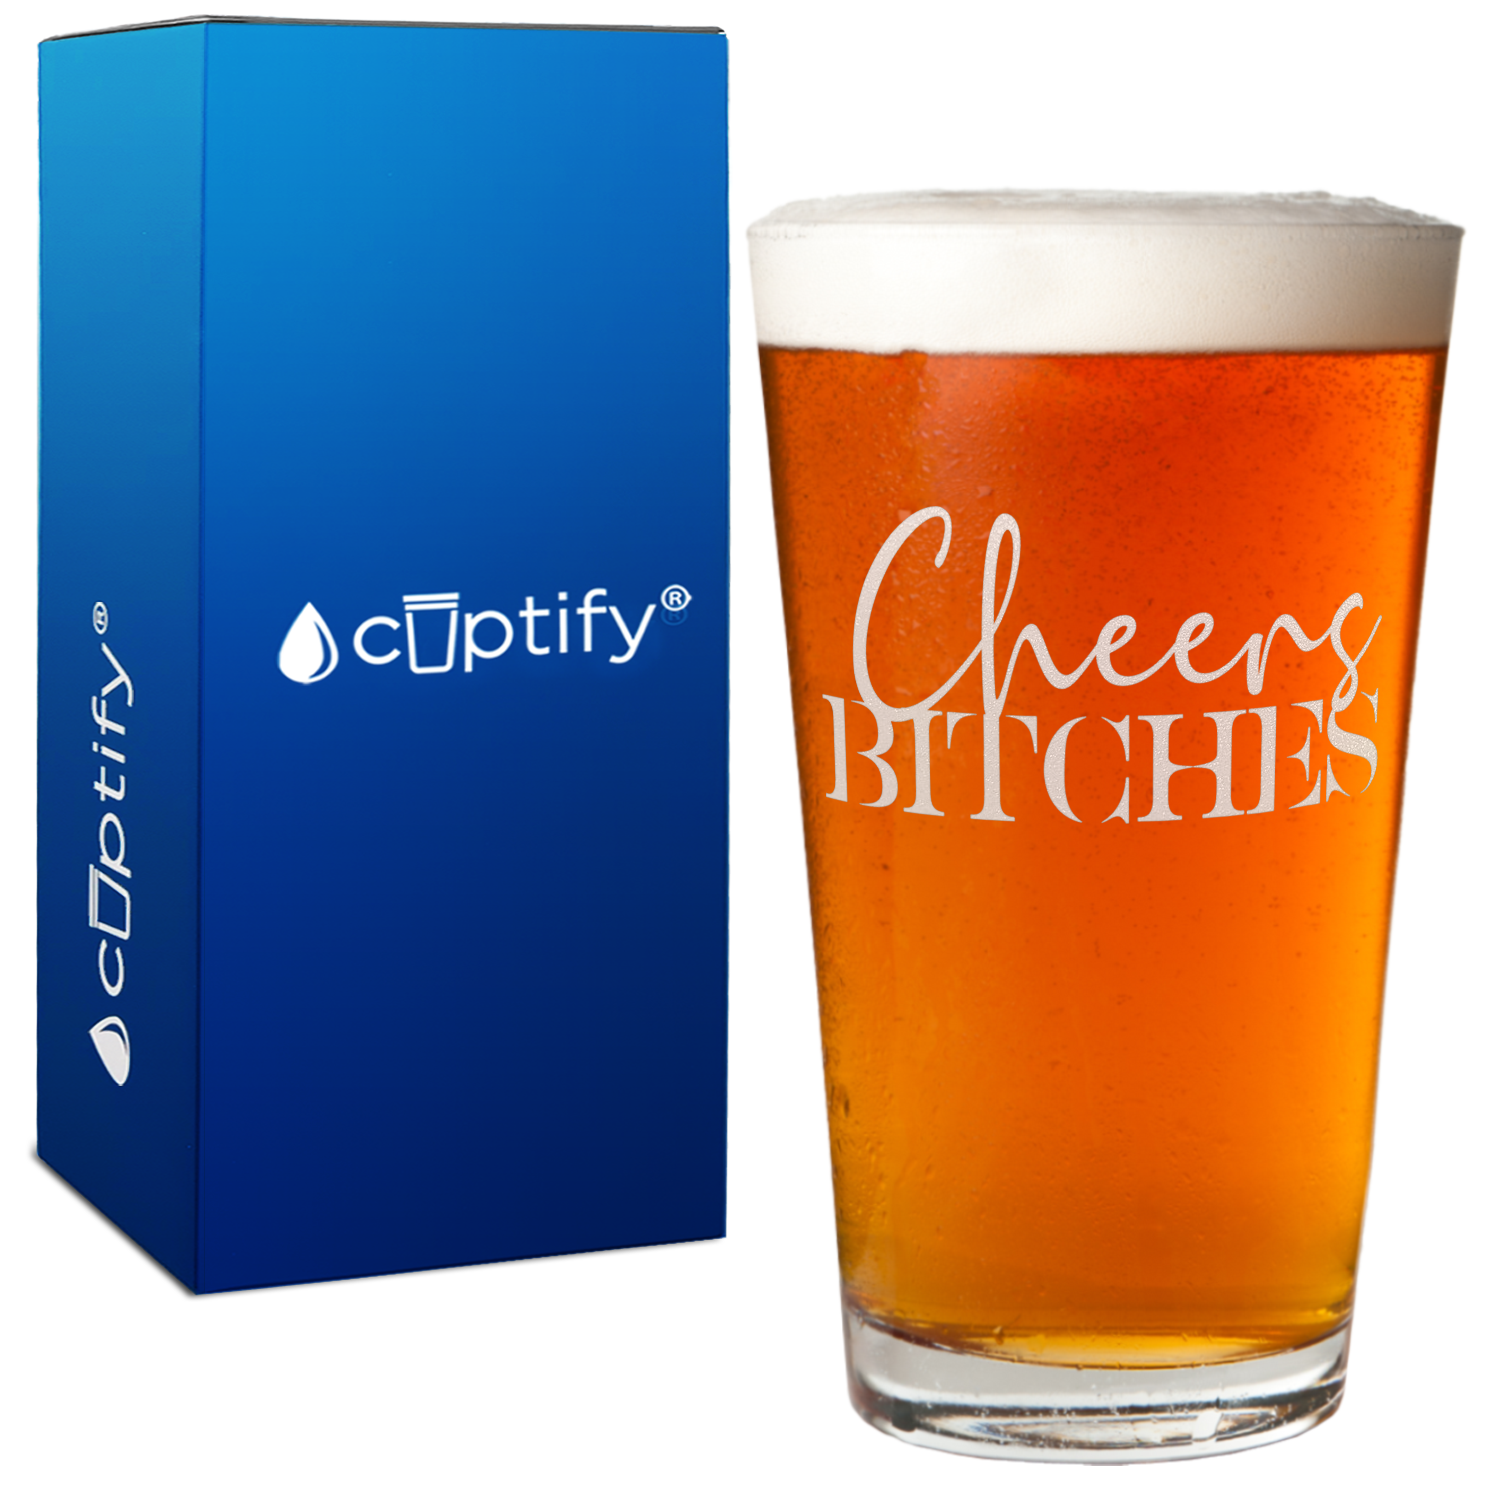 Cheers Bitches 16oz Beer Pint Glass